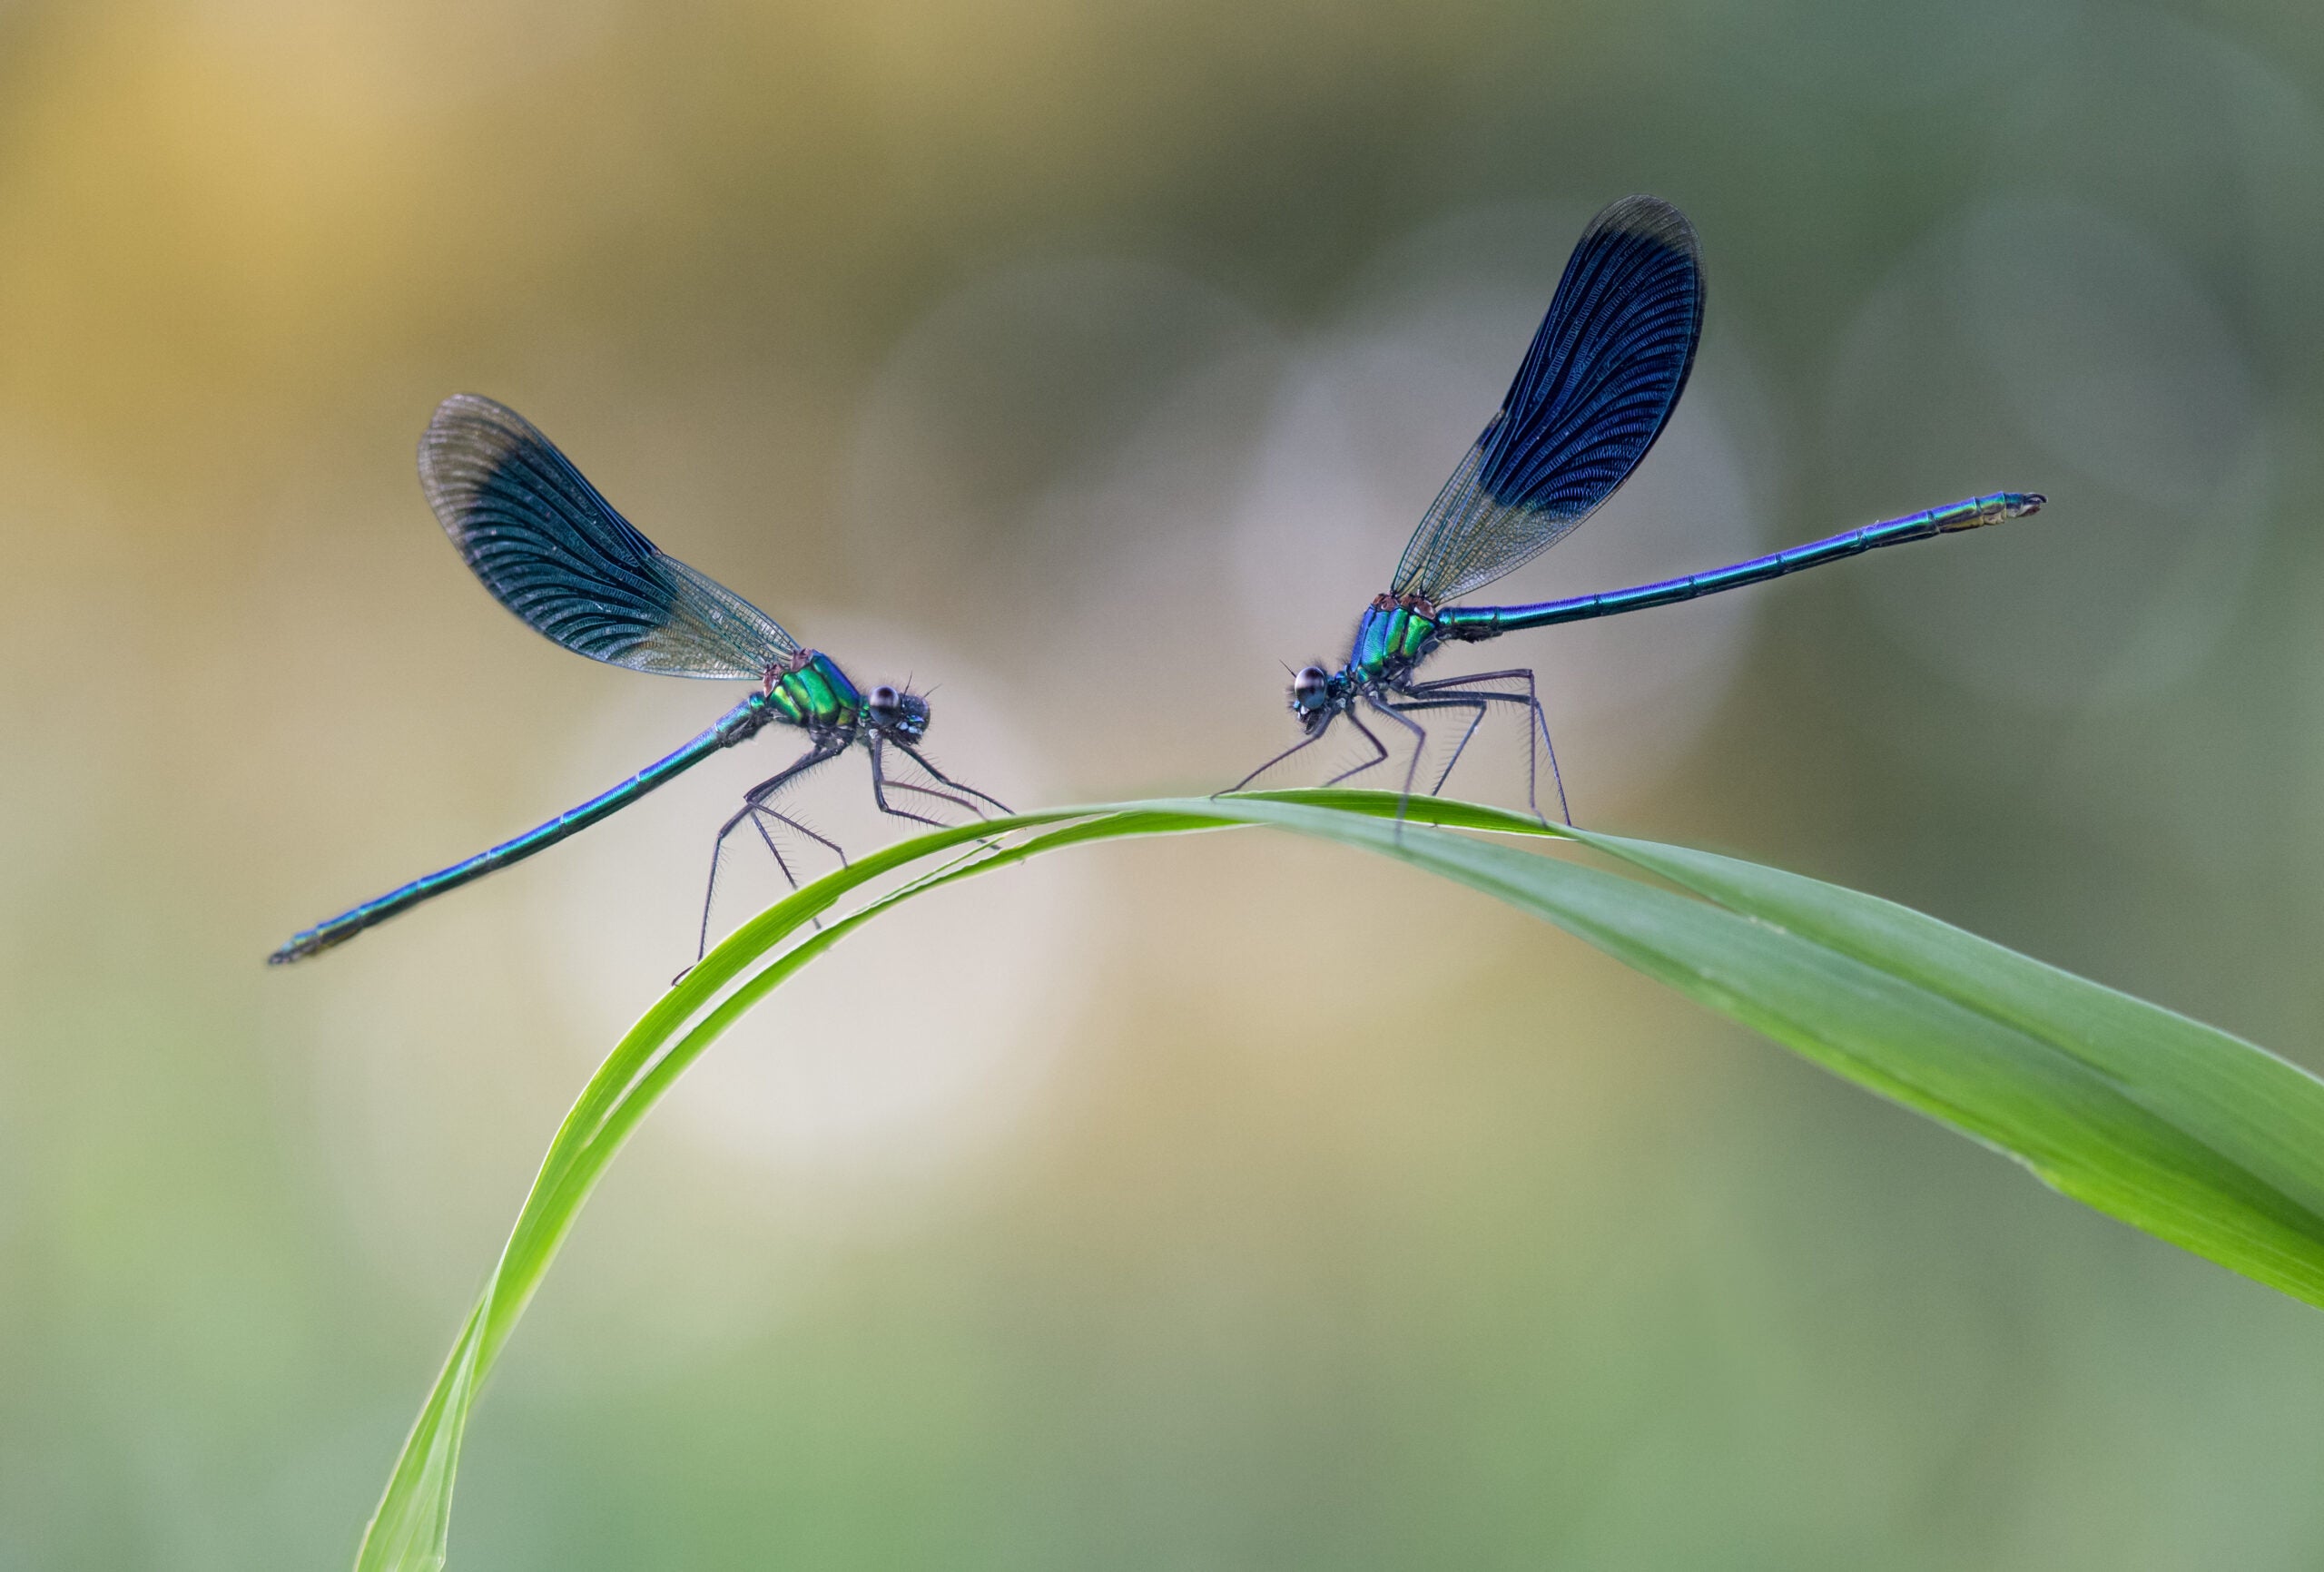 Two dragonflies reflect each other